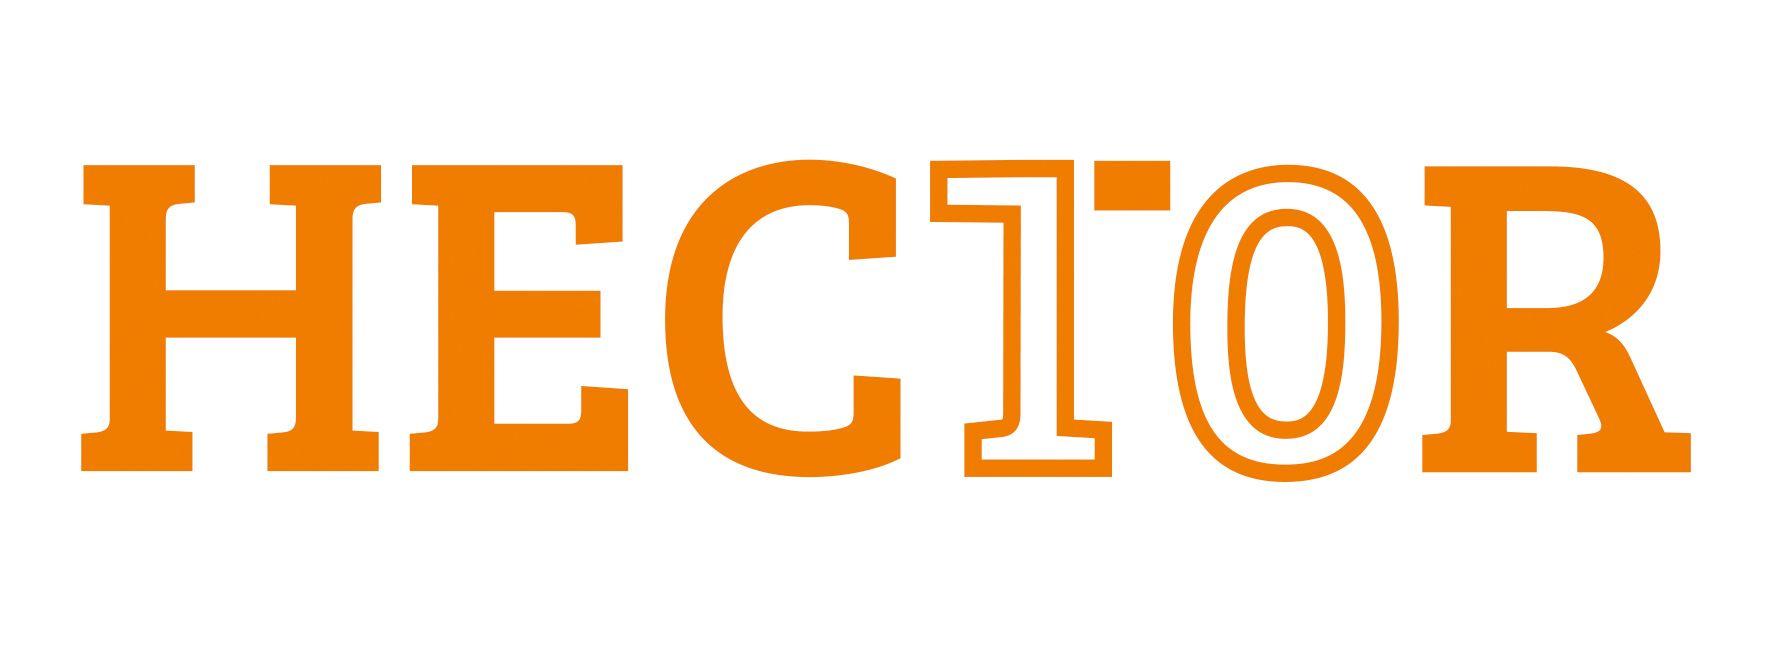 Hector Logo - HARDWARE ENABLED CRYPTO AND RANDOMNESS. HECTOR Project. H2020